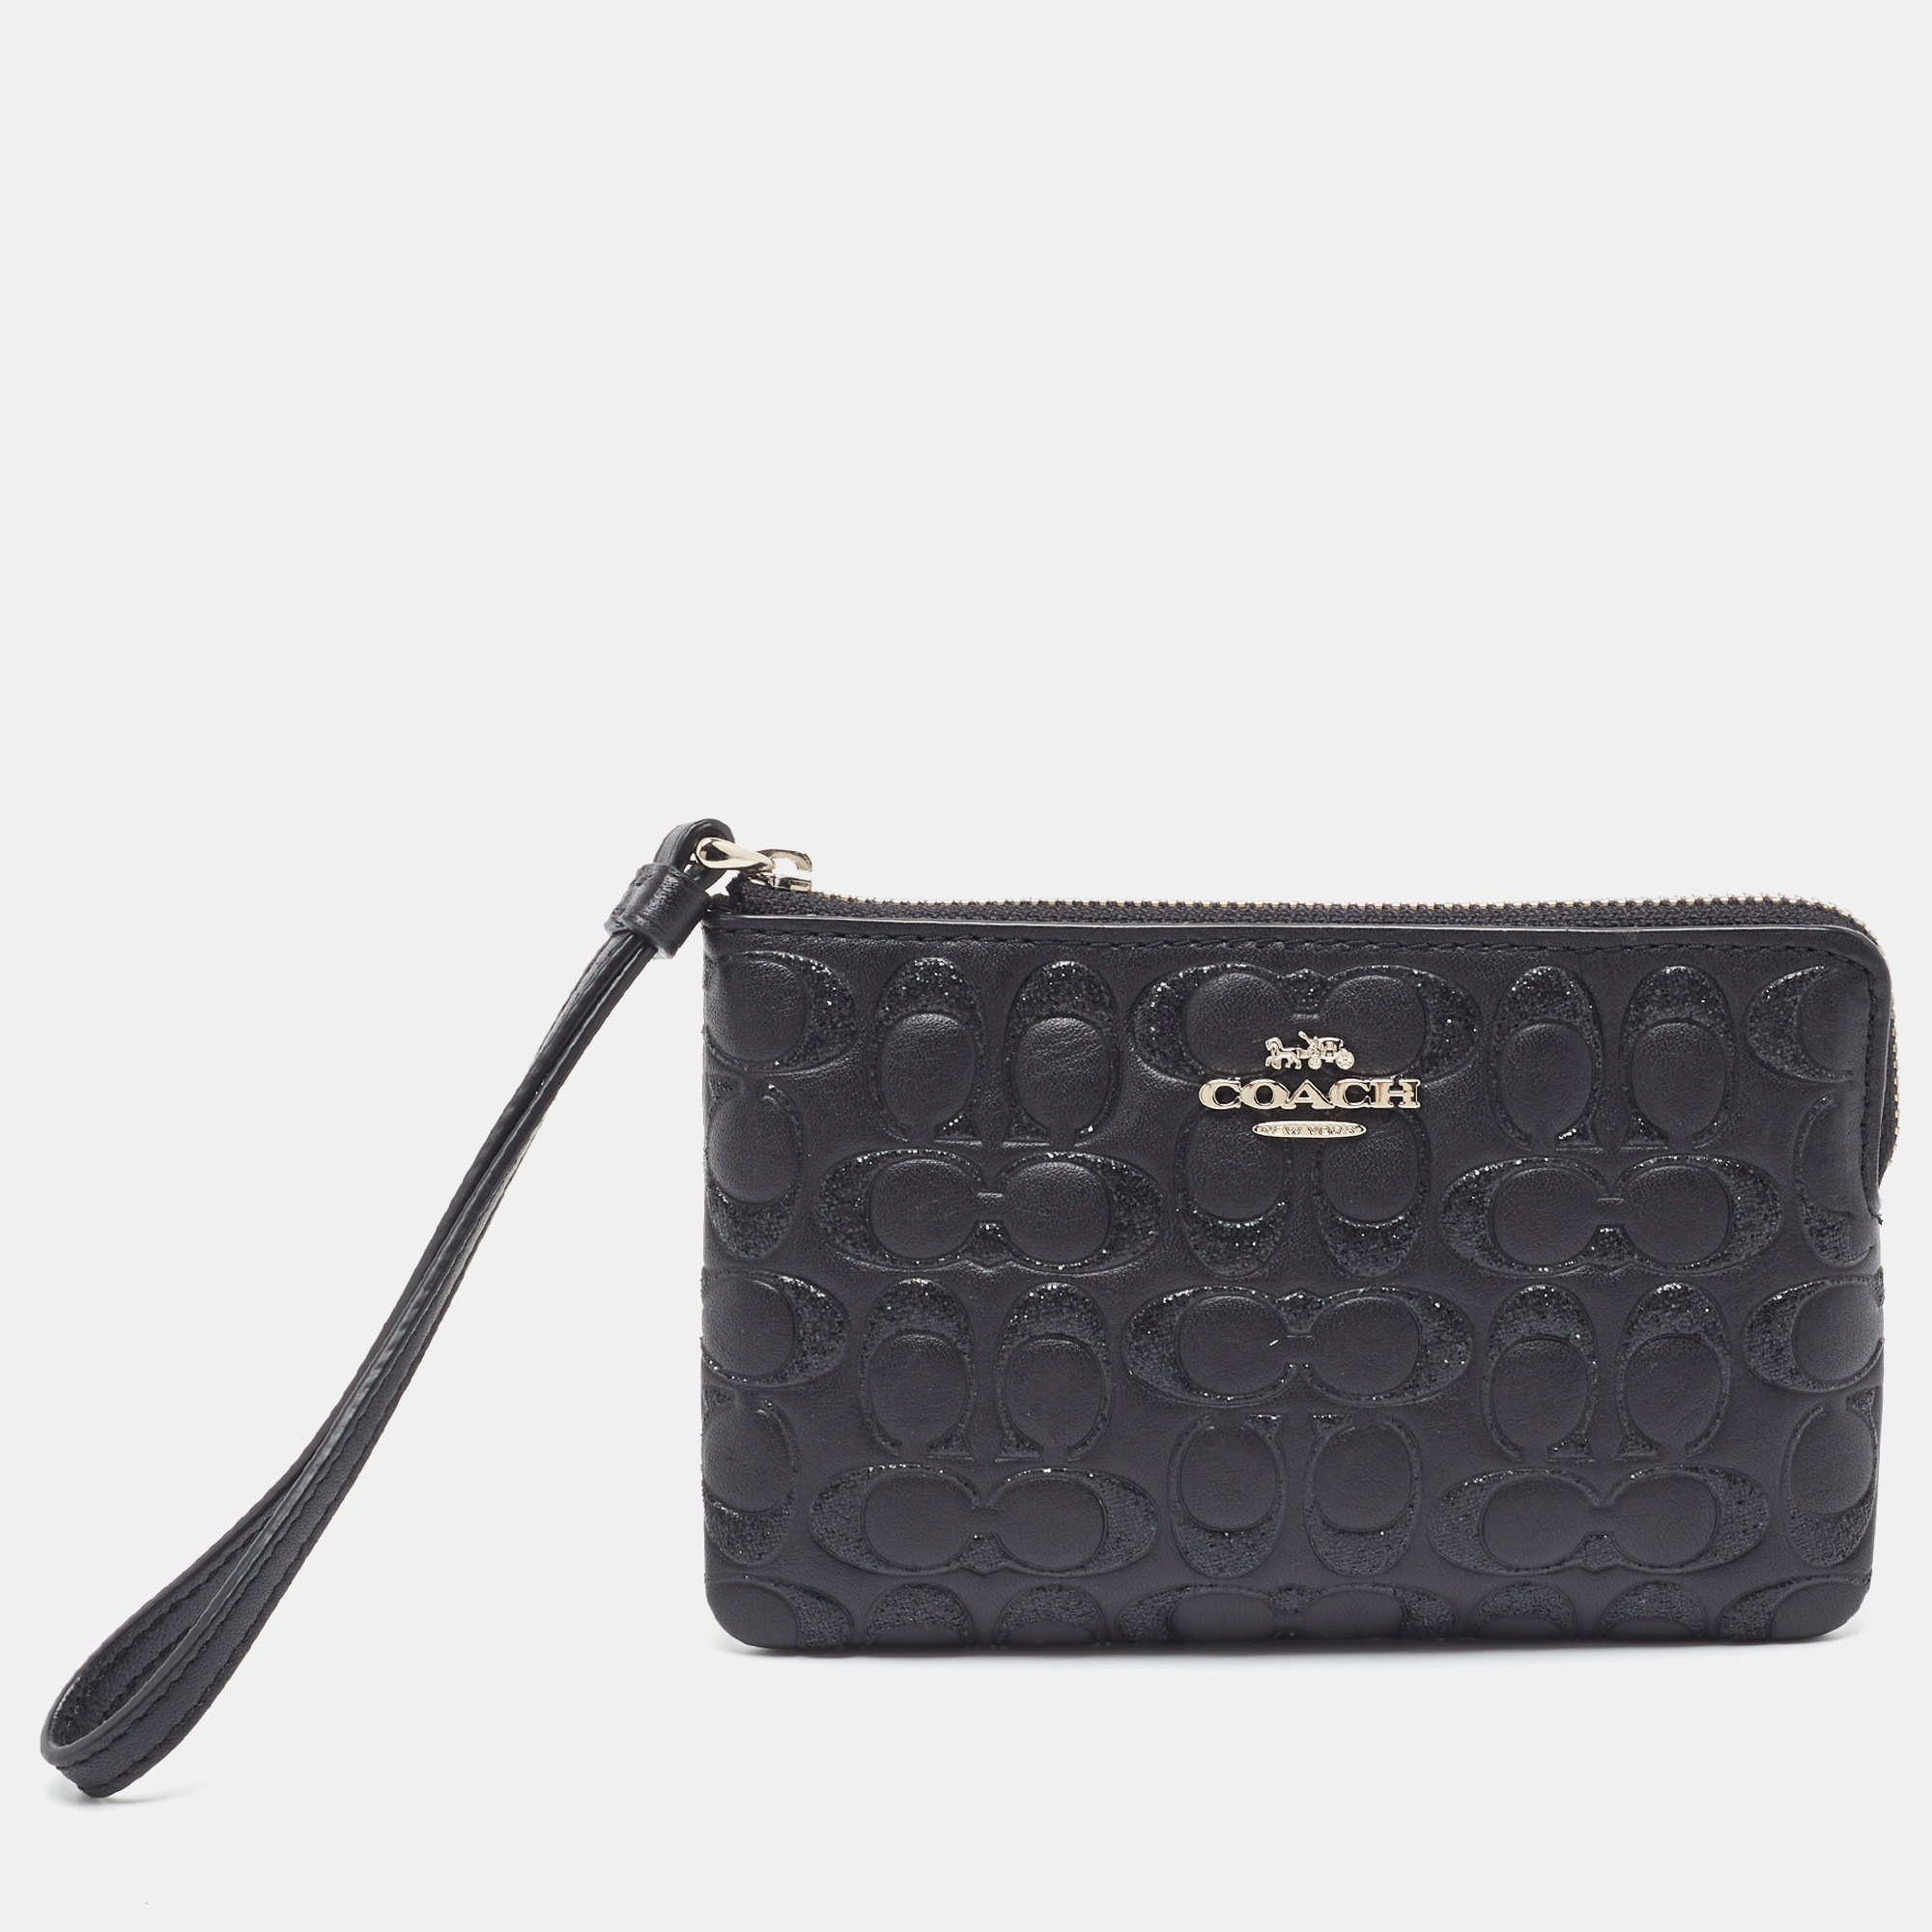 Pre-owned Coach Black Signature Glitter Embossed Leather Boxed Wristlet Clutch